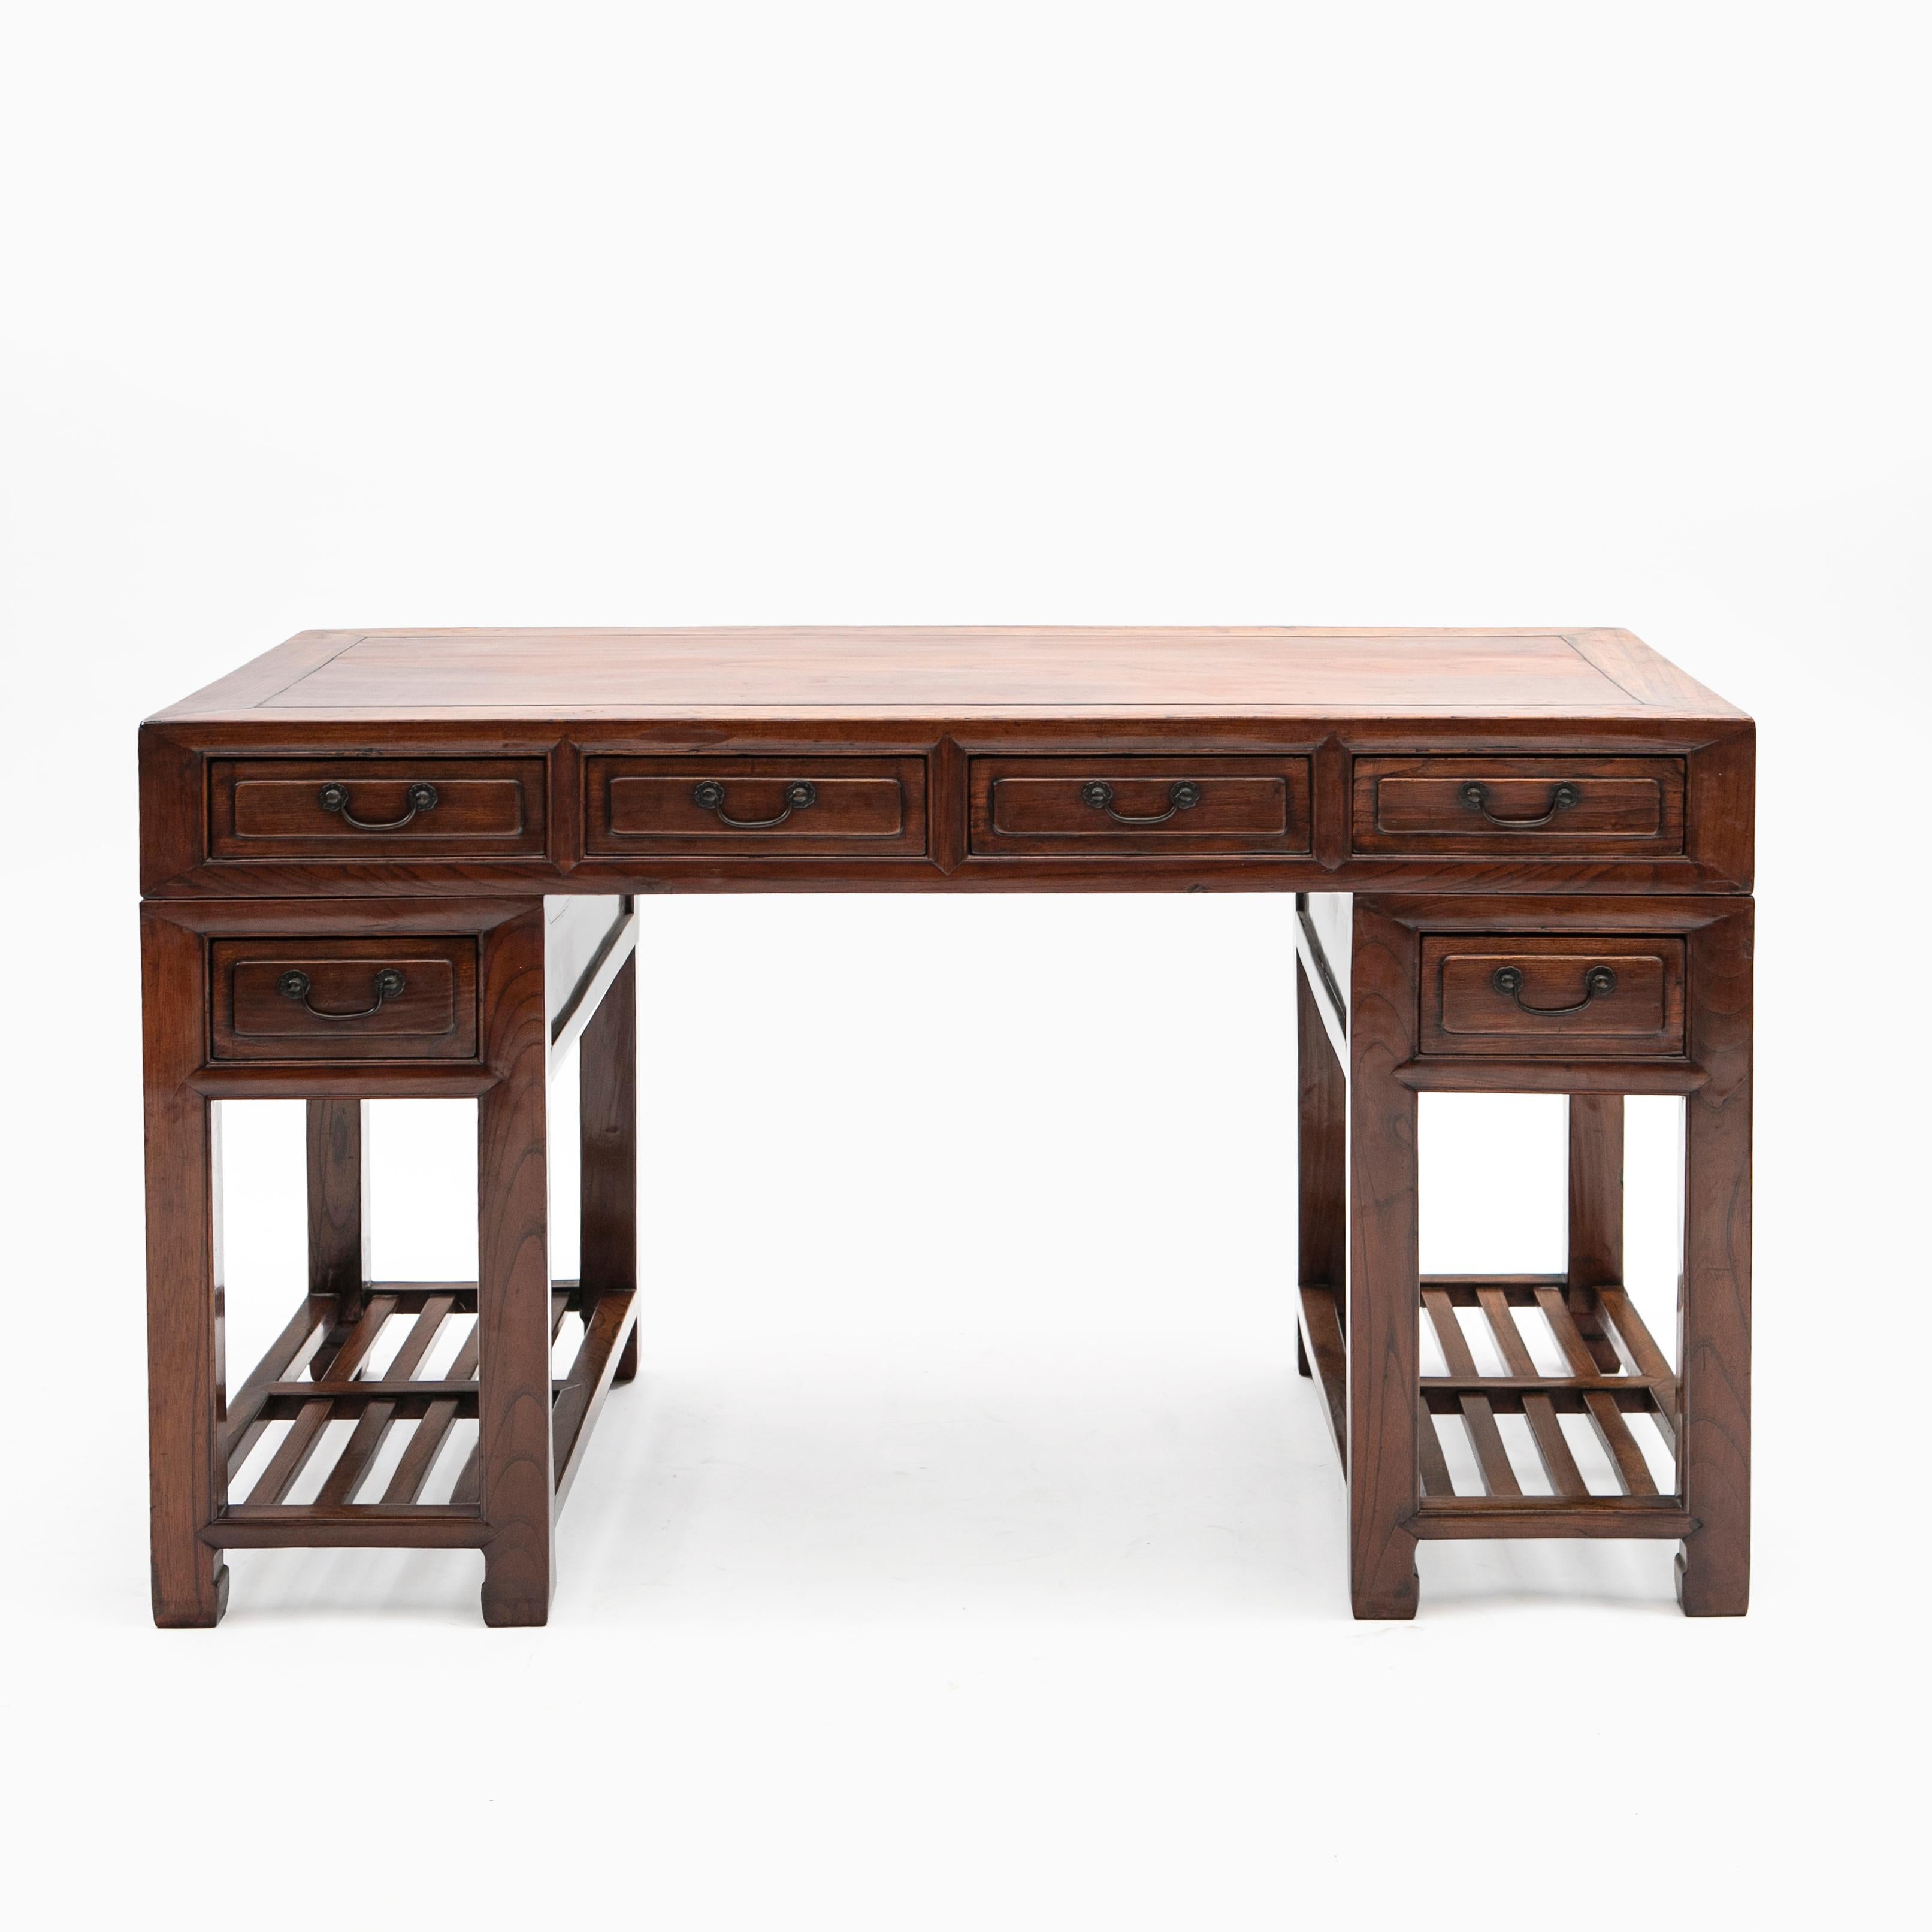 3 part Doctor's desk or Scholar desk in Jumu wood from the city of Suzhou in China, approx. 1900.
Center tabletop made in one piece of wood, which has shrunk over time and therefore is filled with a hard black wax along the sides.
Jumu wood is also